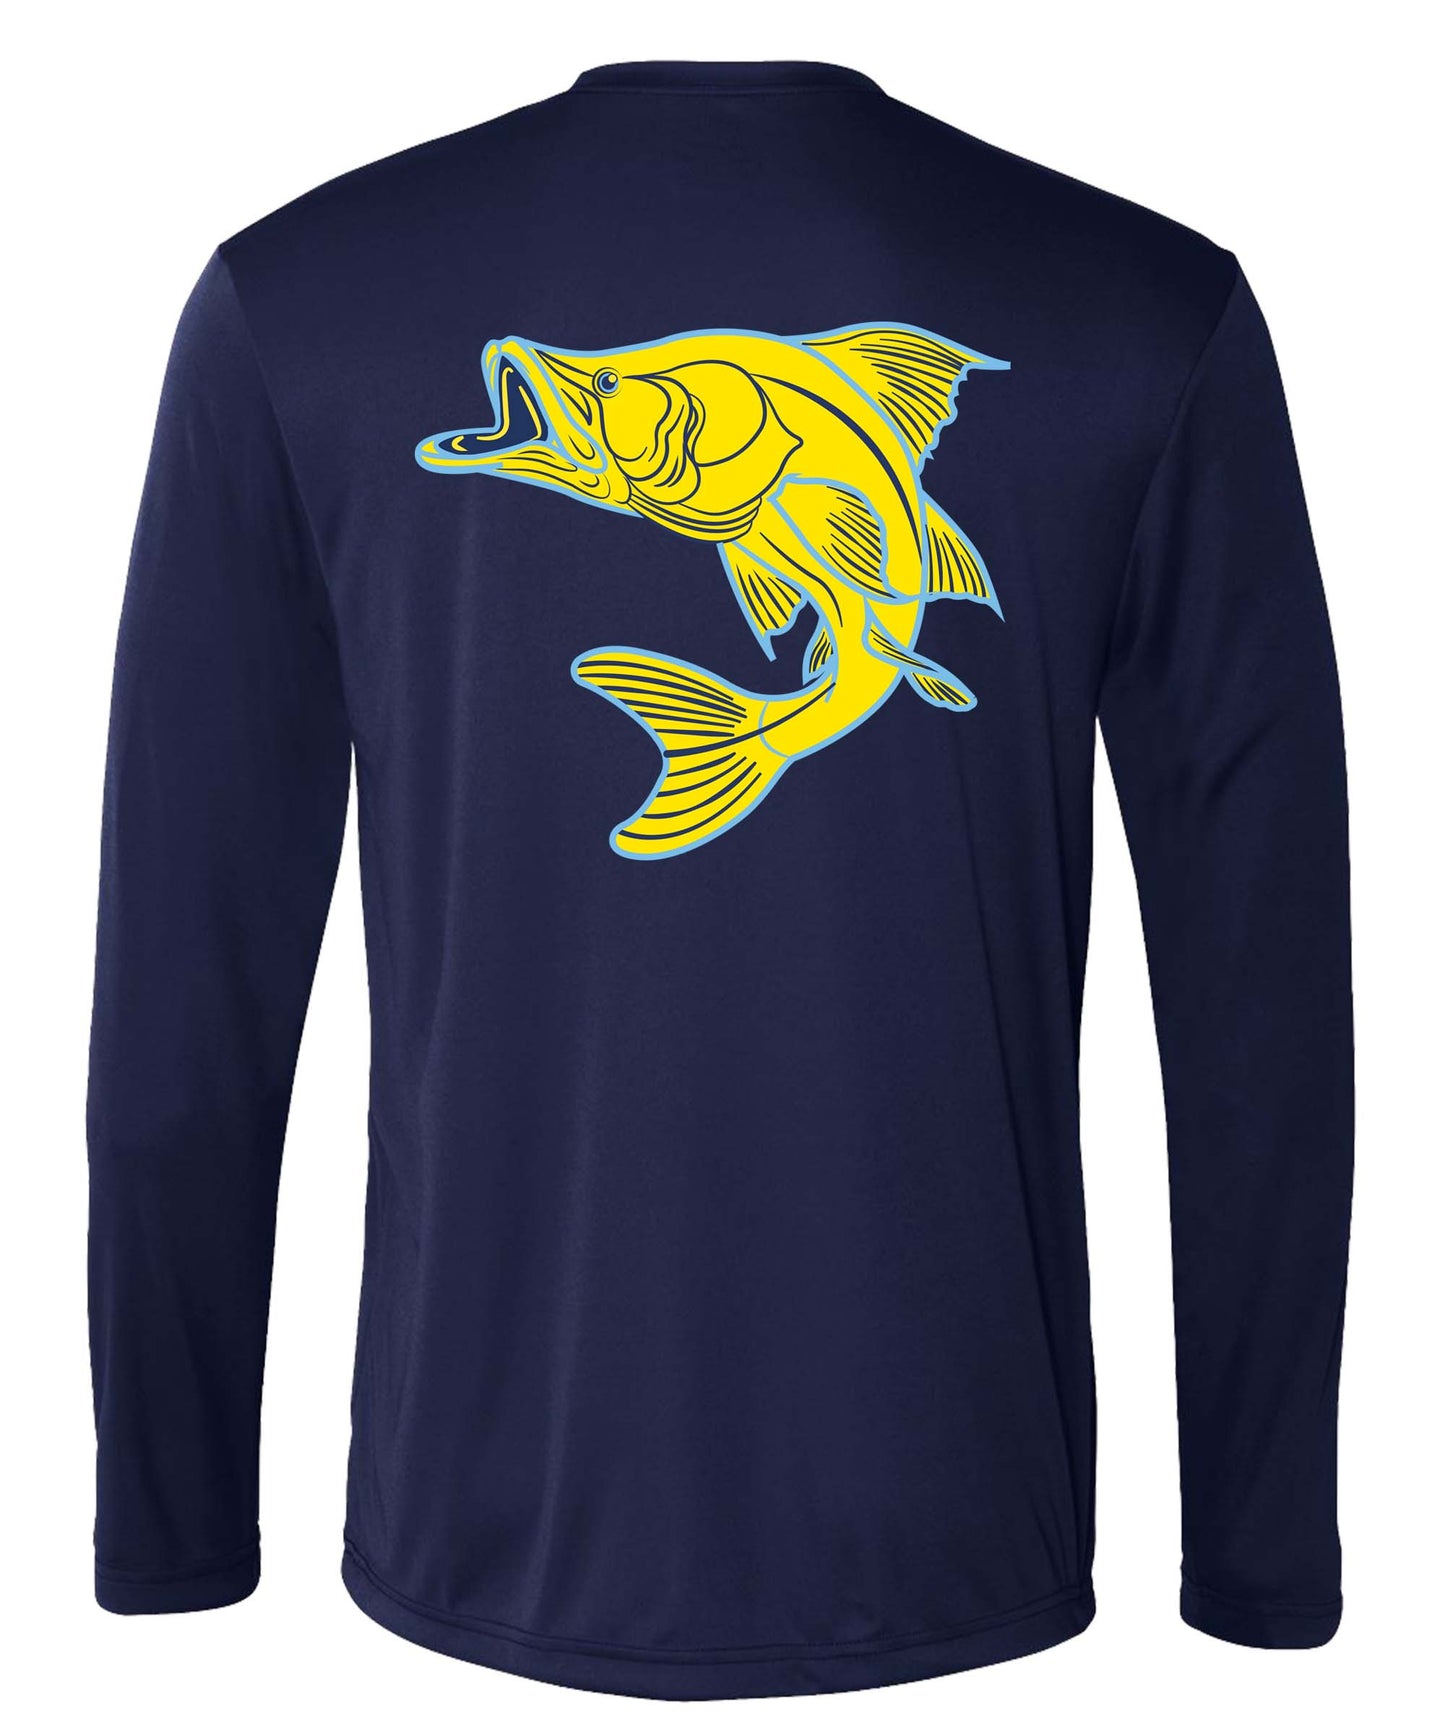 Snook Performance Dry-Fit Fishing Sun Protection shirts-Navy long sleeve